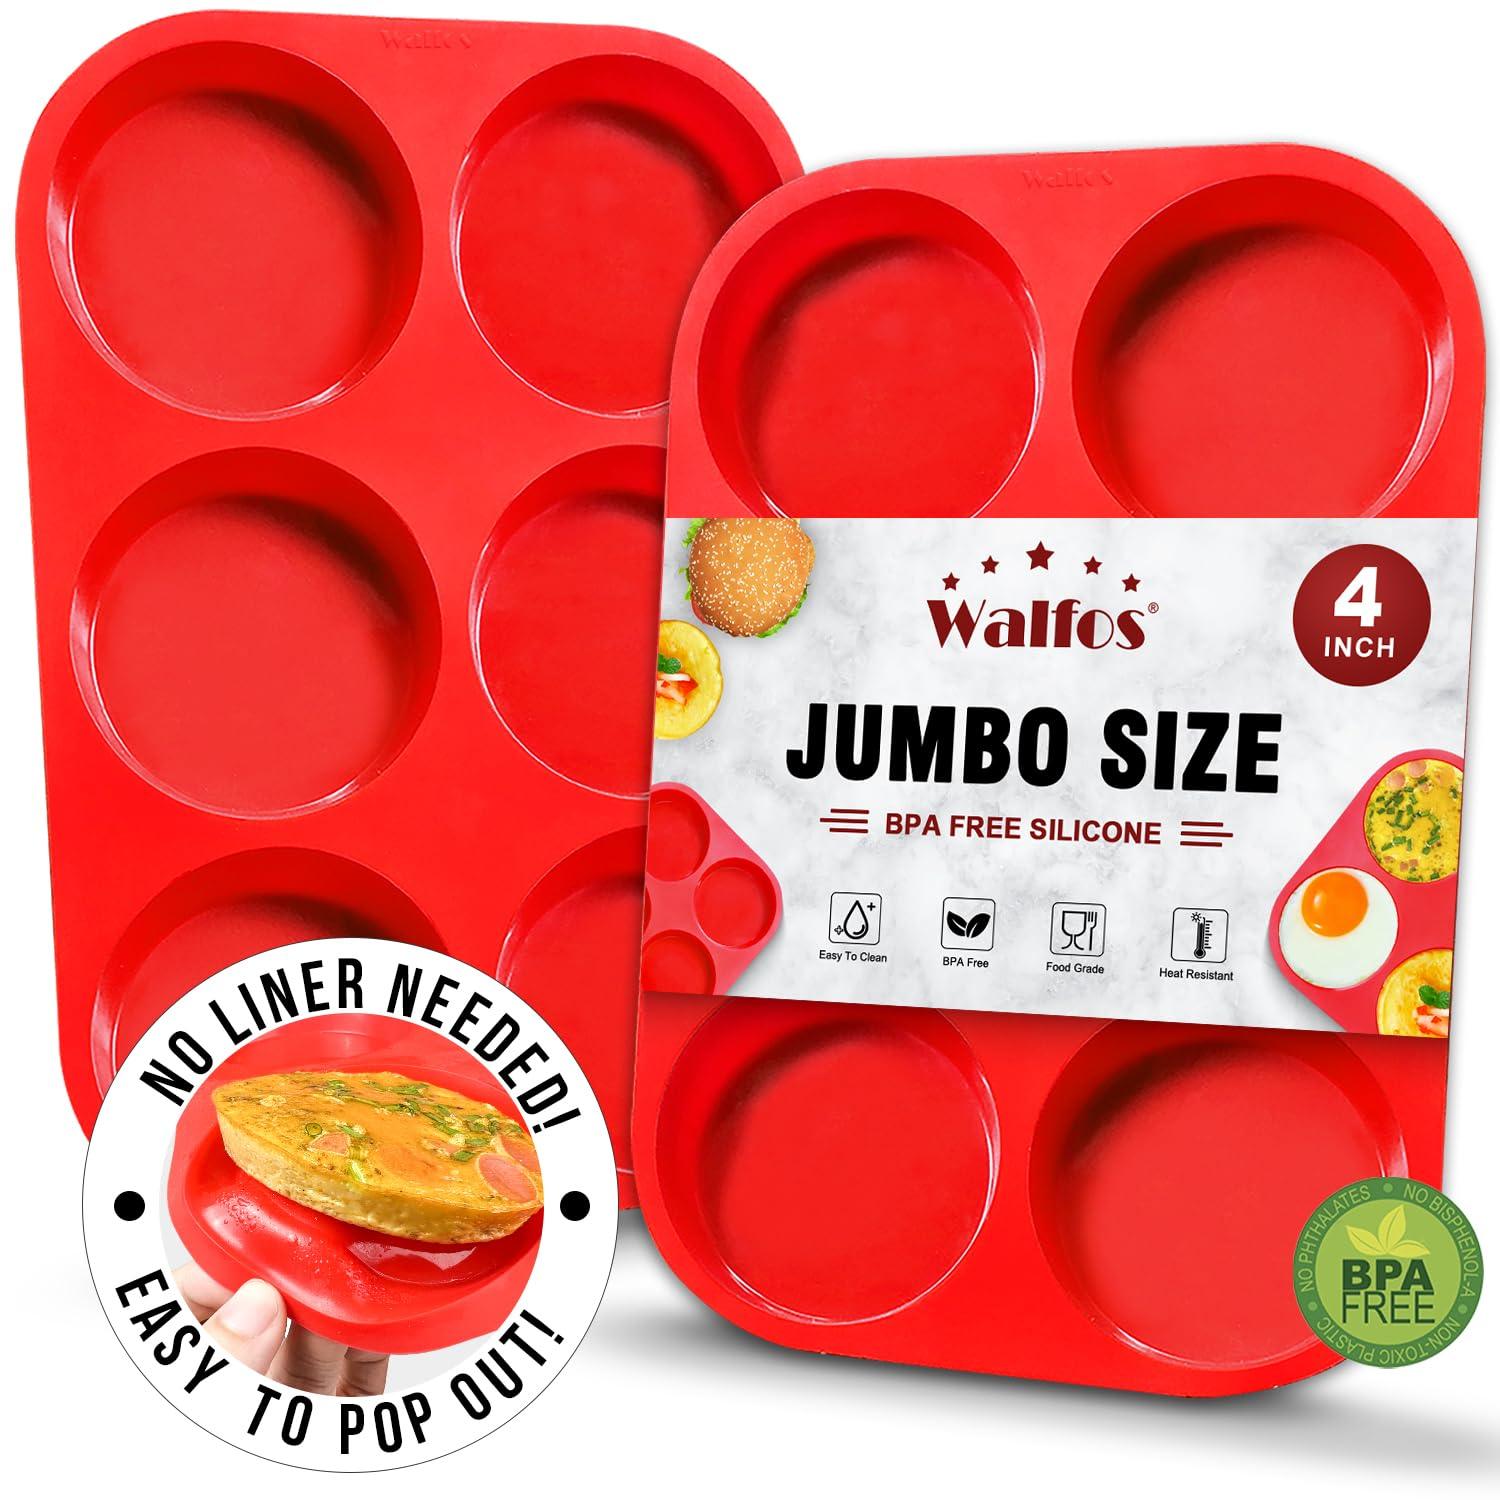 Walfos Silicone Muffin Top Pans for Baking 4inch Jumbo Size, Perfect Results Premium Non-Stick Bakeware Egg Baking Pan, Great for Eggs, Hamburger Bun, Muffin Top and More, Food Grade & BPA Free, 2pcs - CookCave